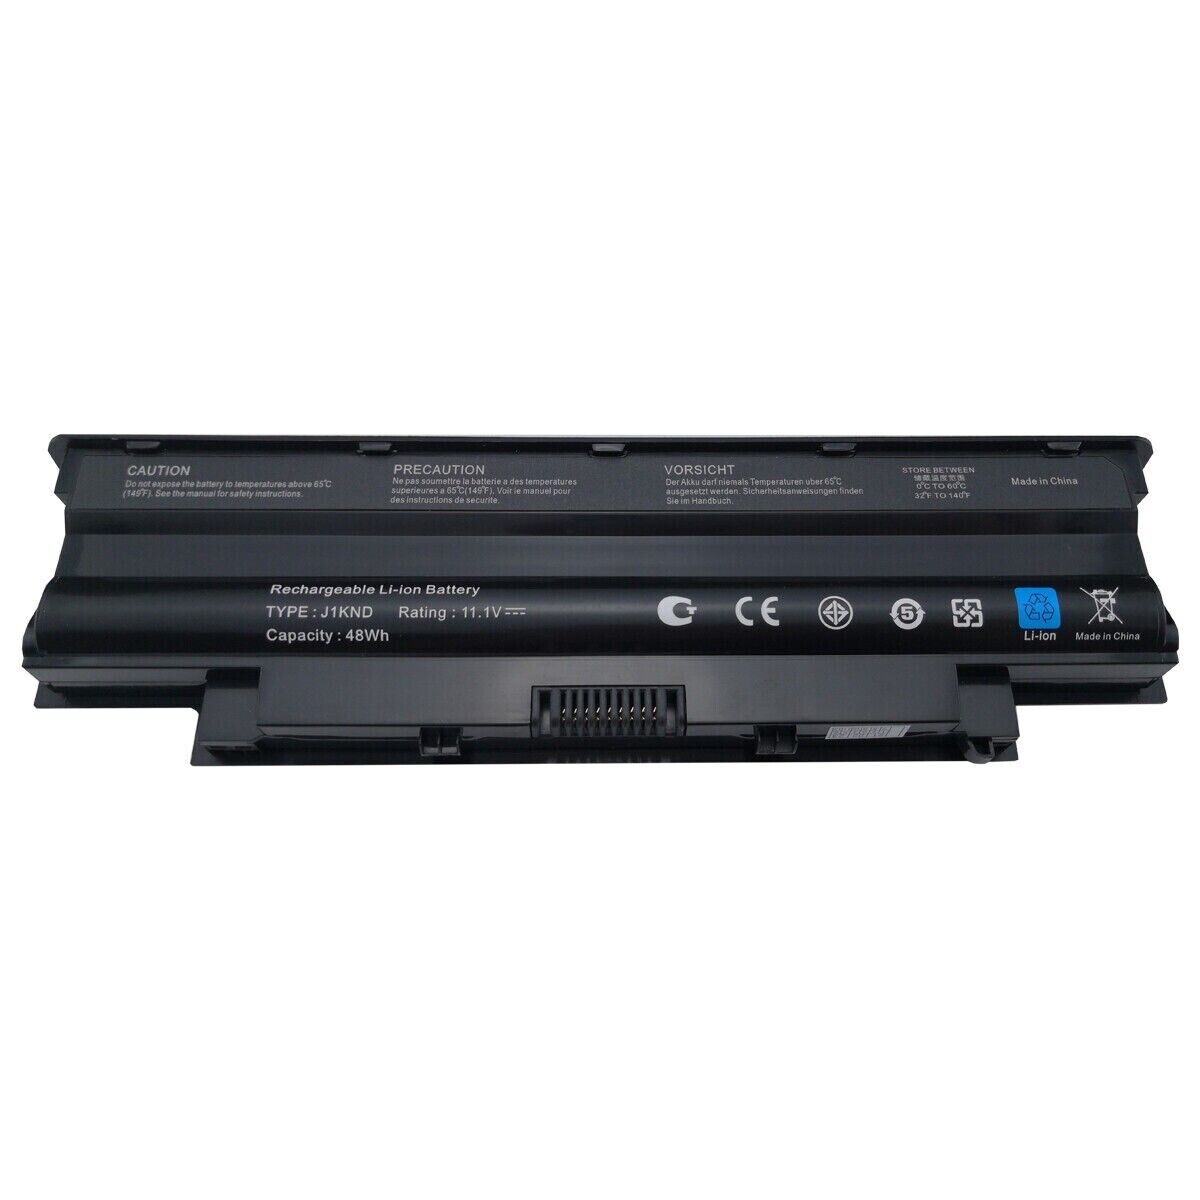 Battery J1KND For DELL Inspiron 3520 3420 M5030 N5110 N5050 N4010 N7110 Laptop